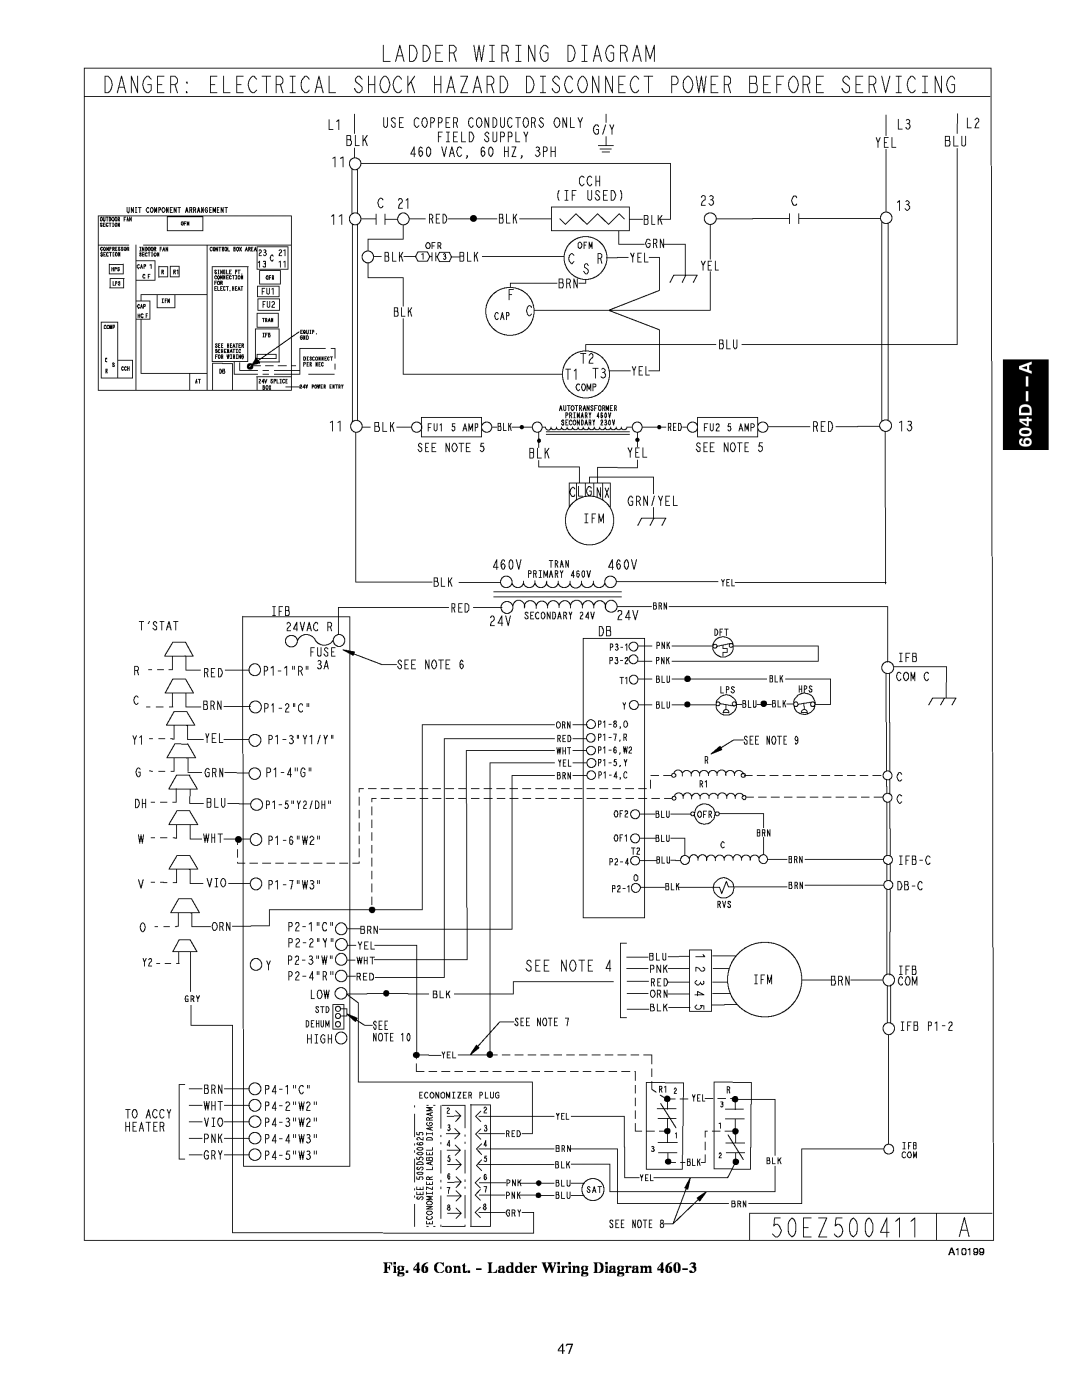 Bryant 604D--A installation instructions Cont. - Ladder Wiring Diagram, 604D-- --A 